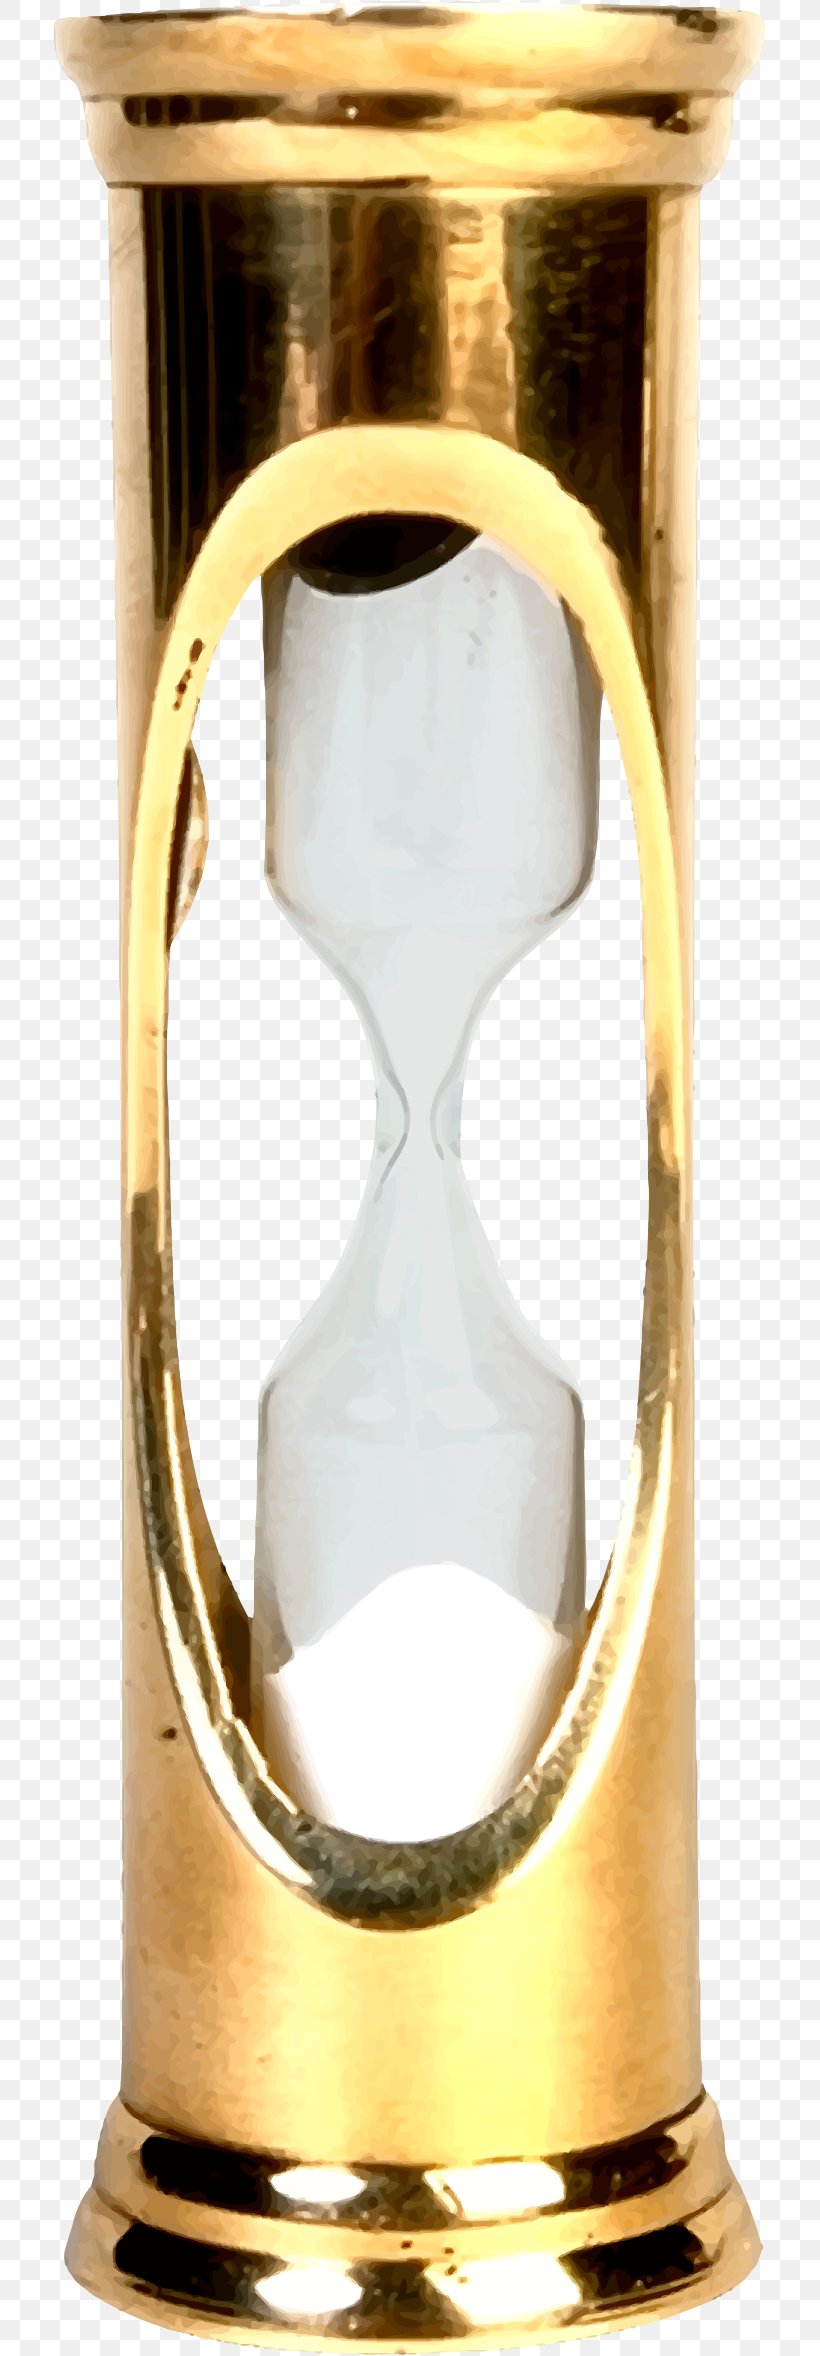 Hourglass Clock Time Clip Art, PNG, 713x2356px, Hourglass, Animation, Blog, Brass, Centerblog Download Free